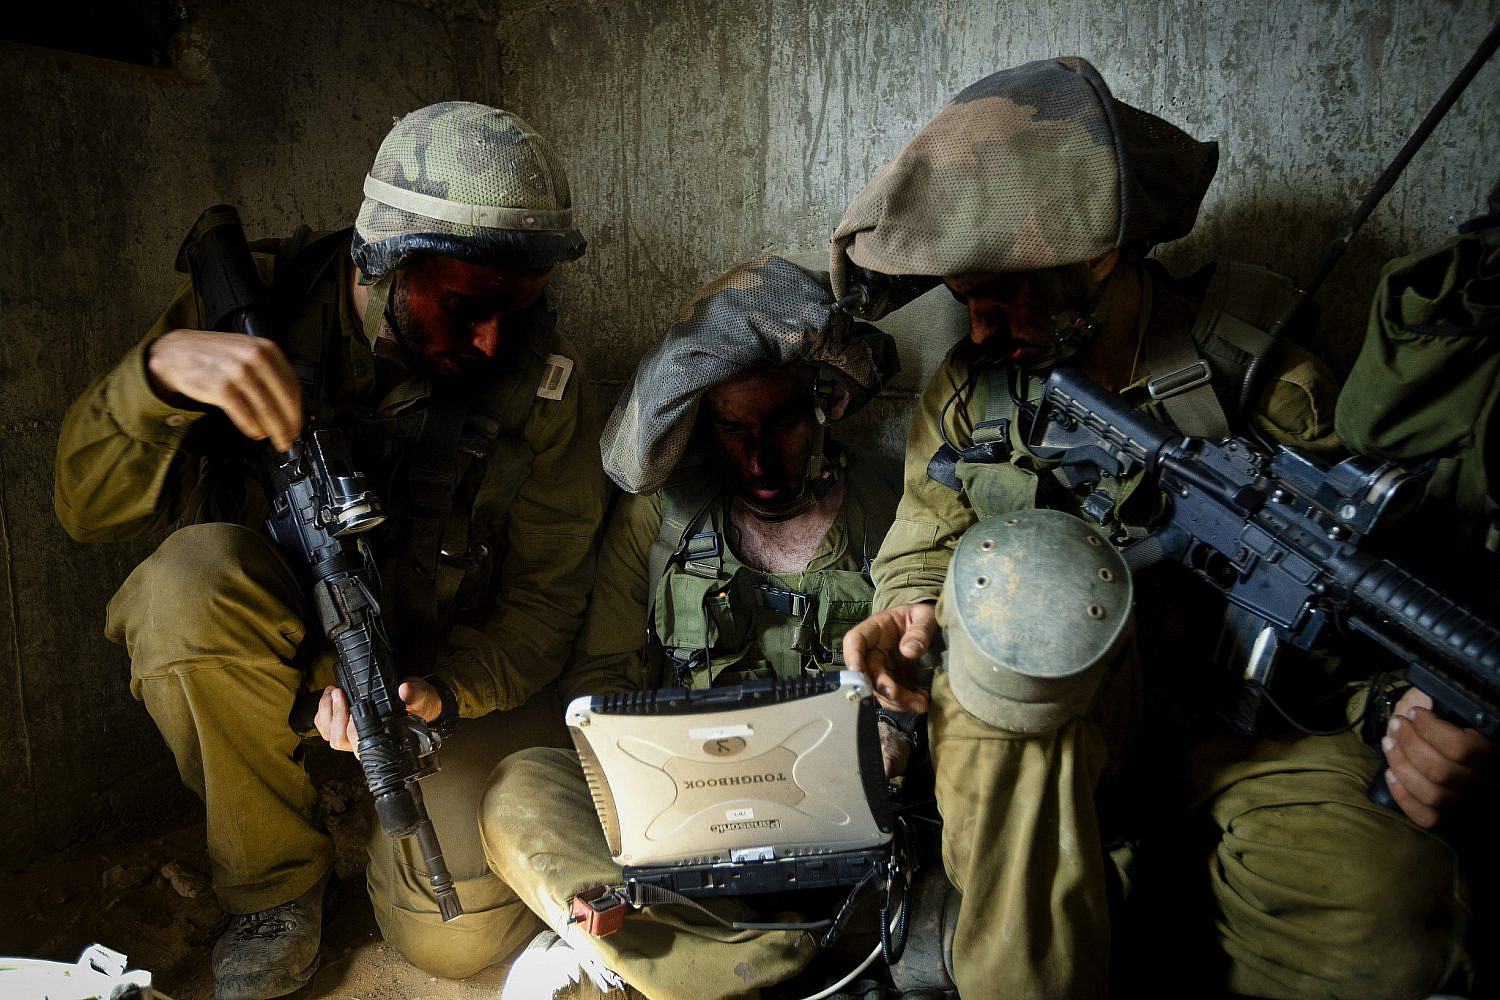 Israeli soldiers of the operational unit 8200 training in the field, Sep 11, 2012. (Moshe Shai/Flash90)